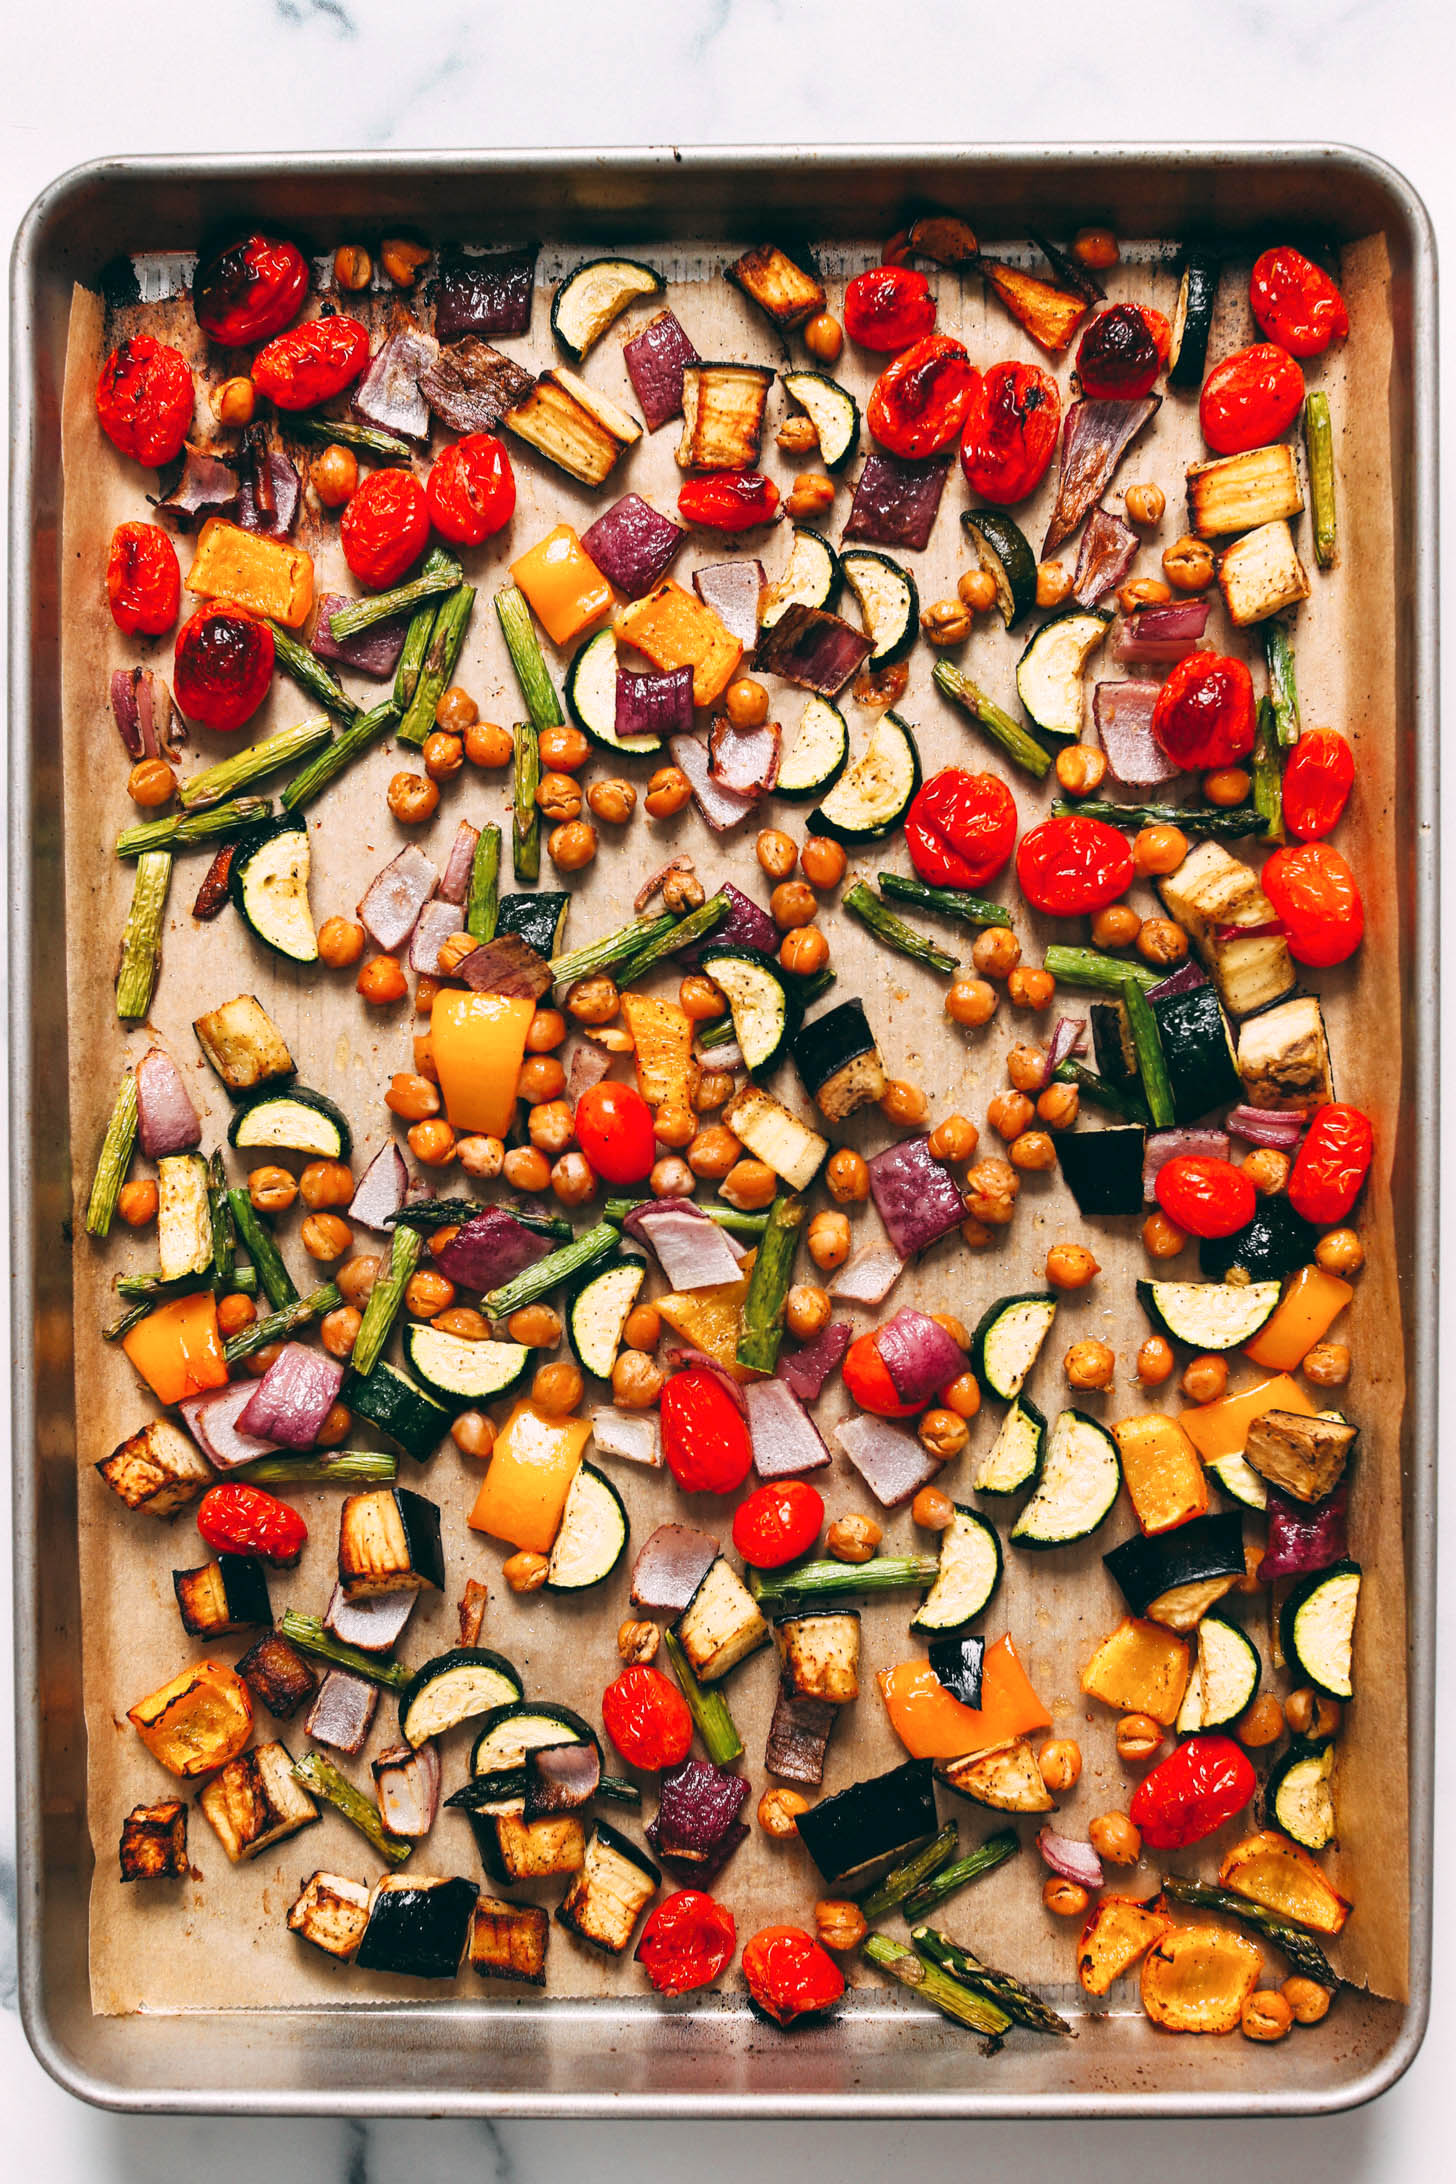 Baking sheet with roasted eggplant, cherry tomatoes, zucchini, asparagus, chickpeas, and bell peppers